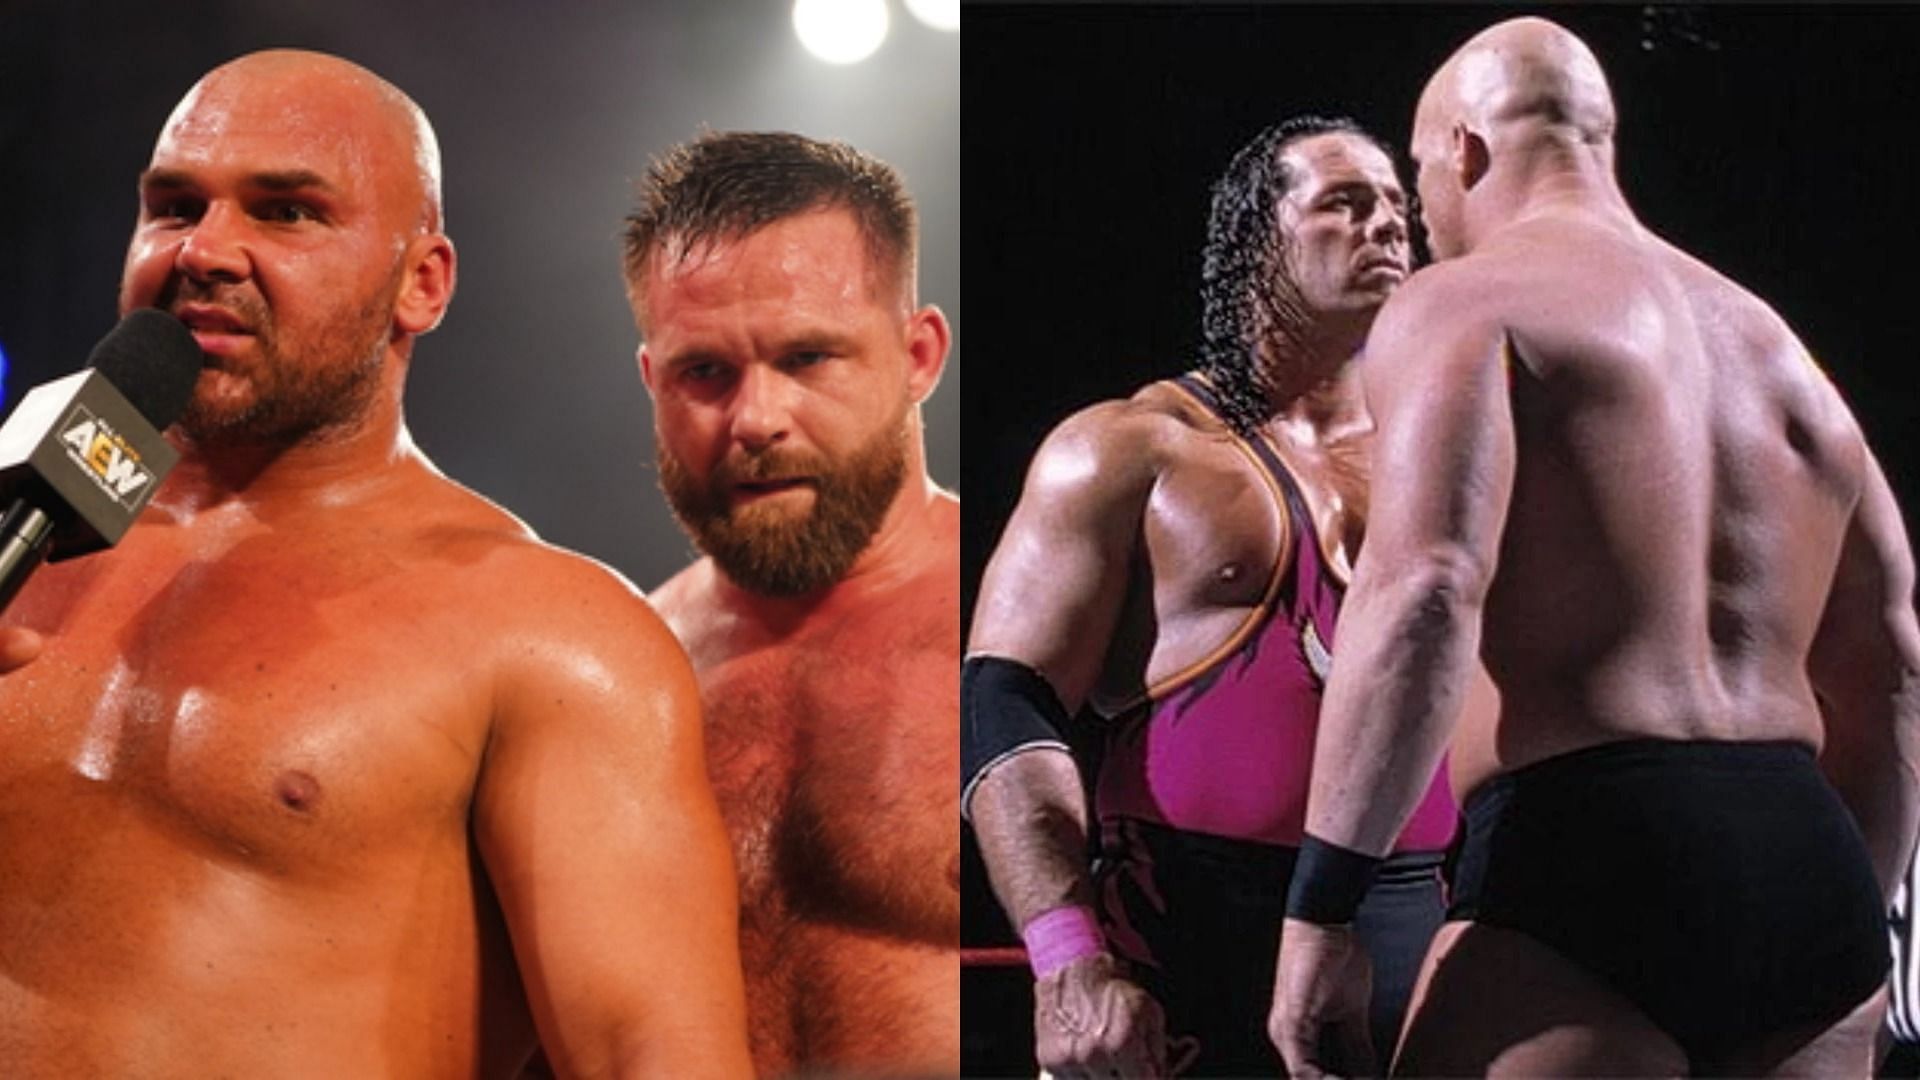 FTR have compared one of their matches to Bret Hart and Steve Austin